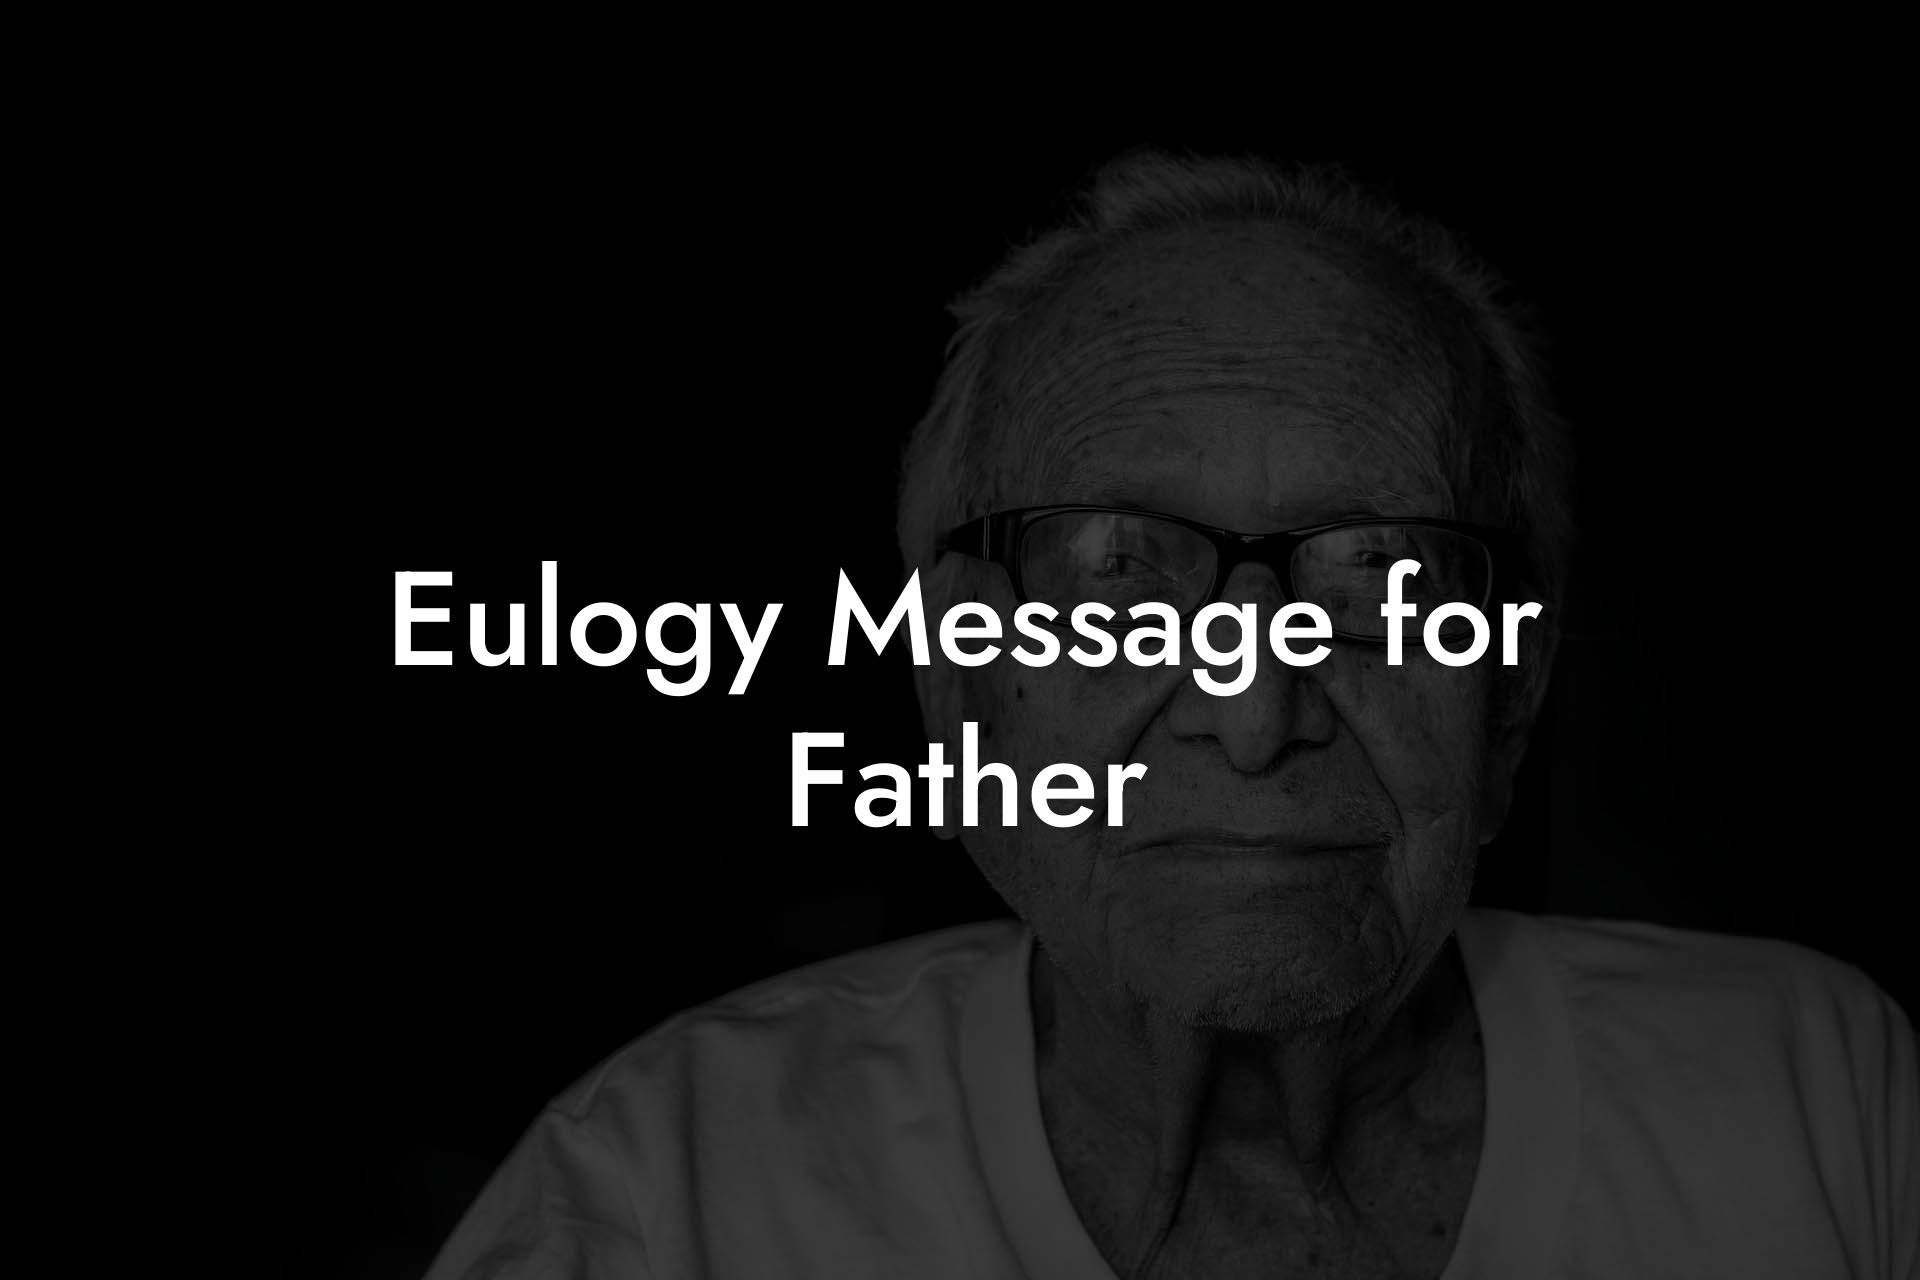 Eulogy Message for Father